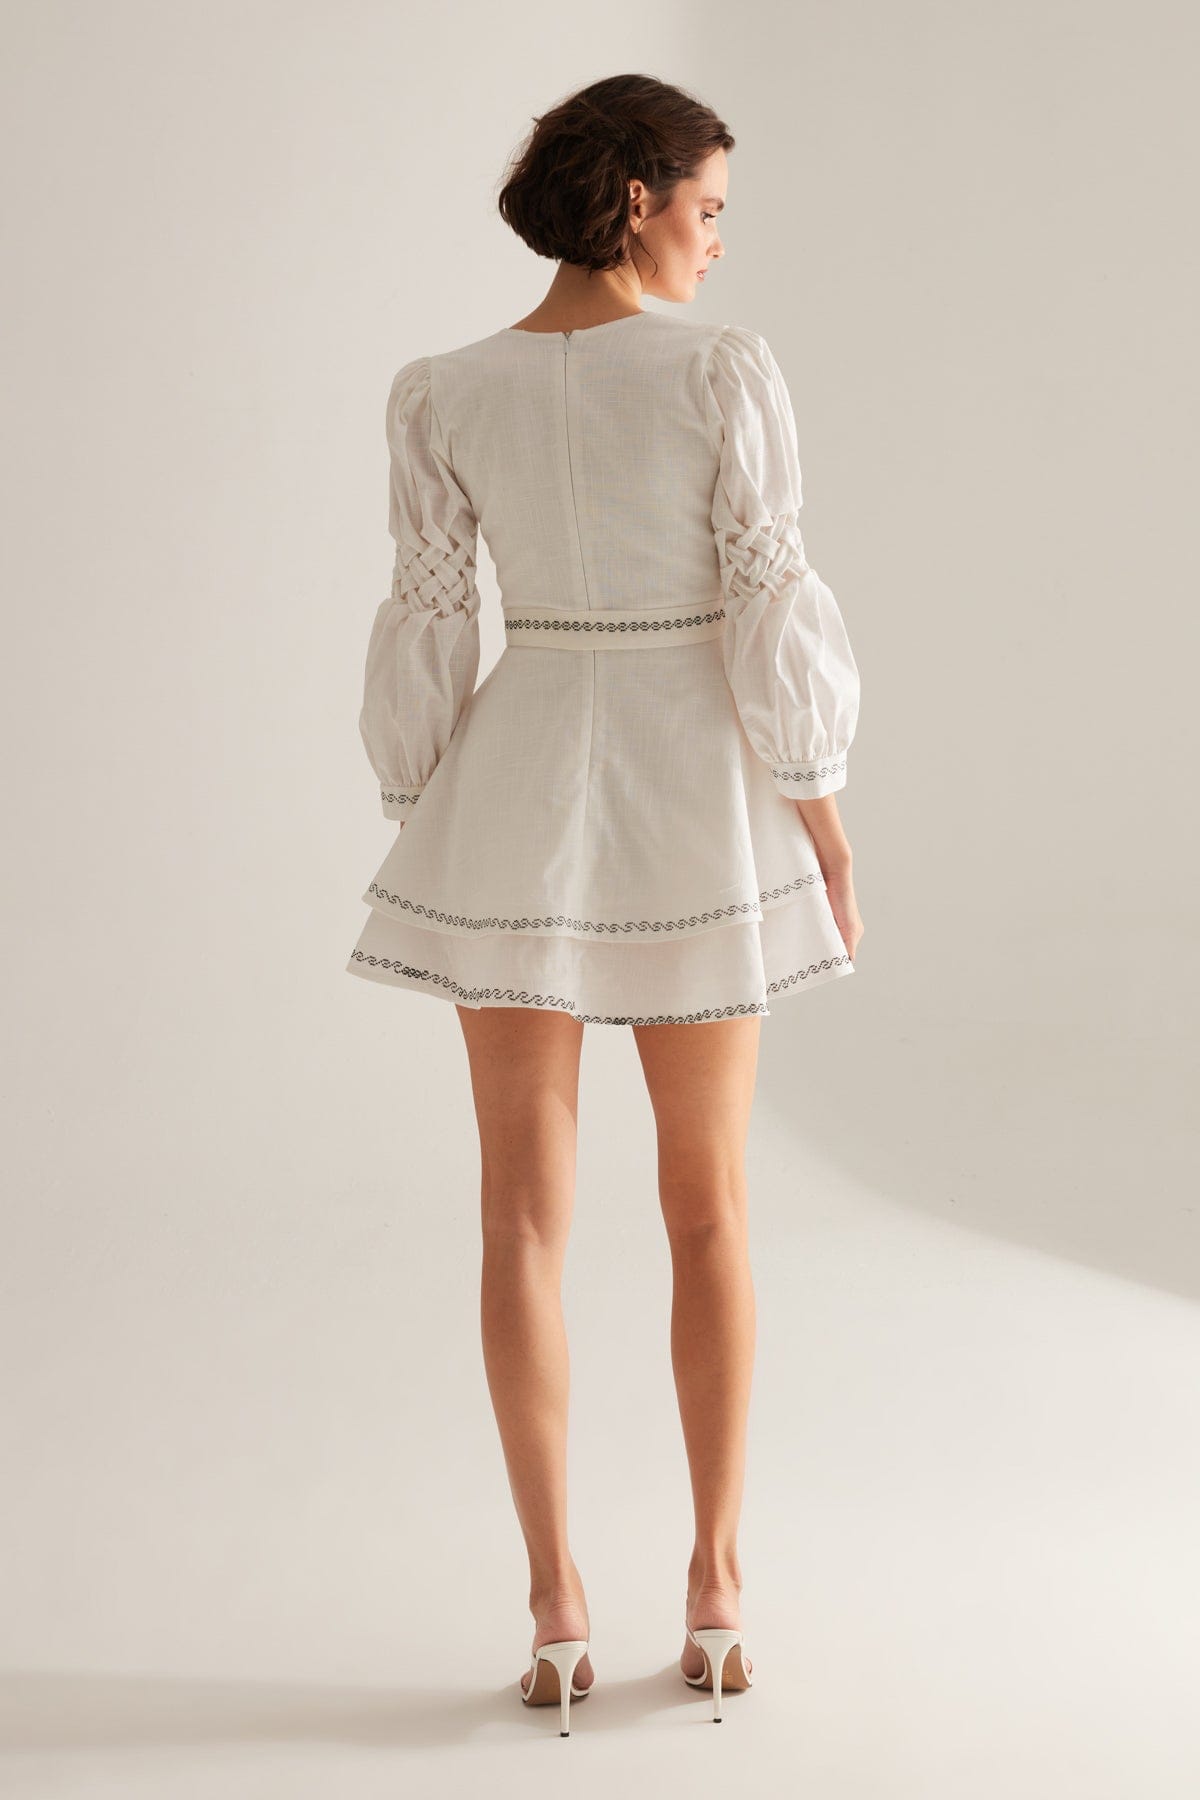 White Embroidered Layered Flounce Dress